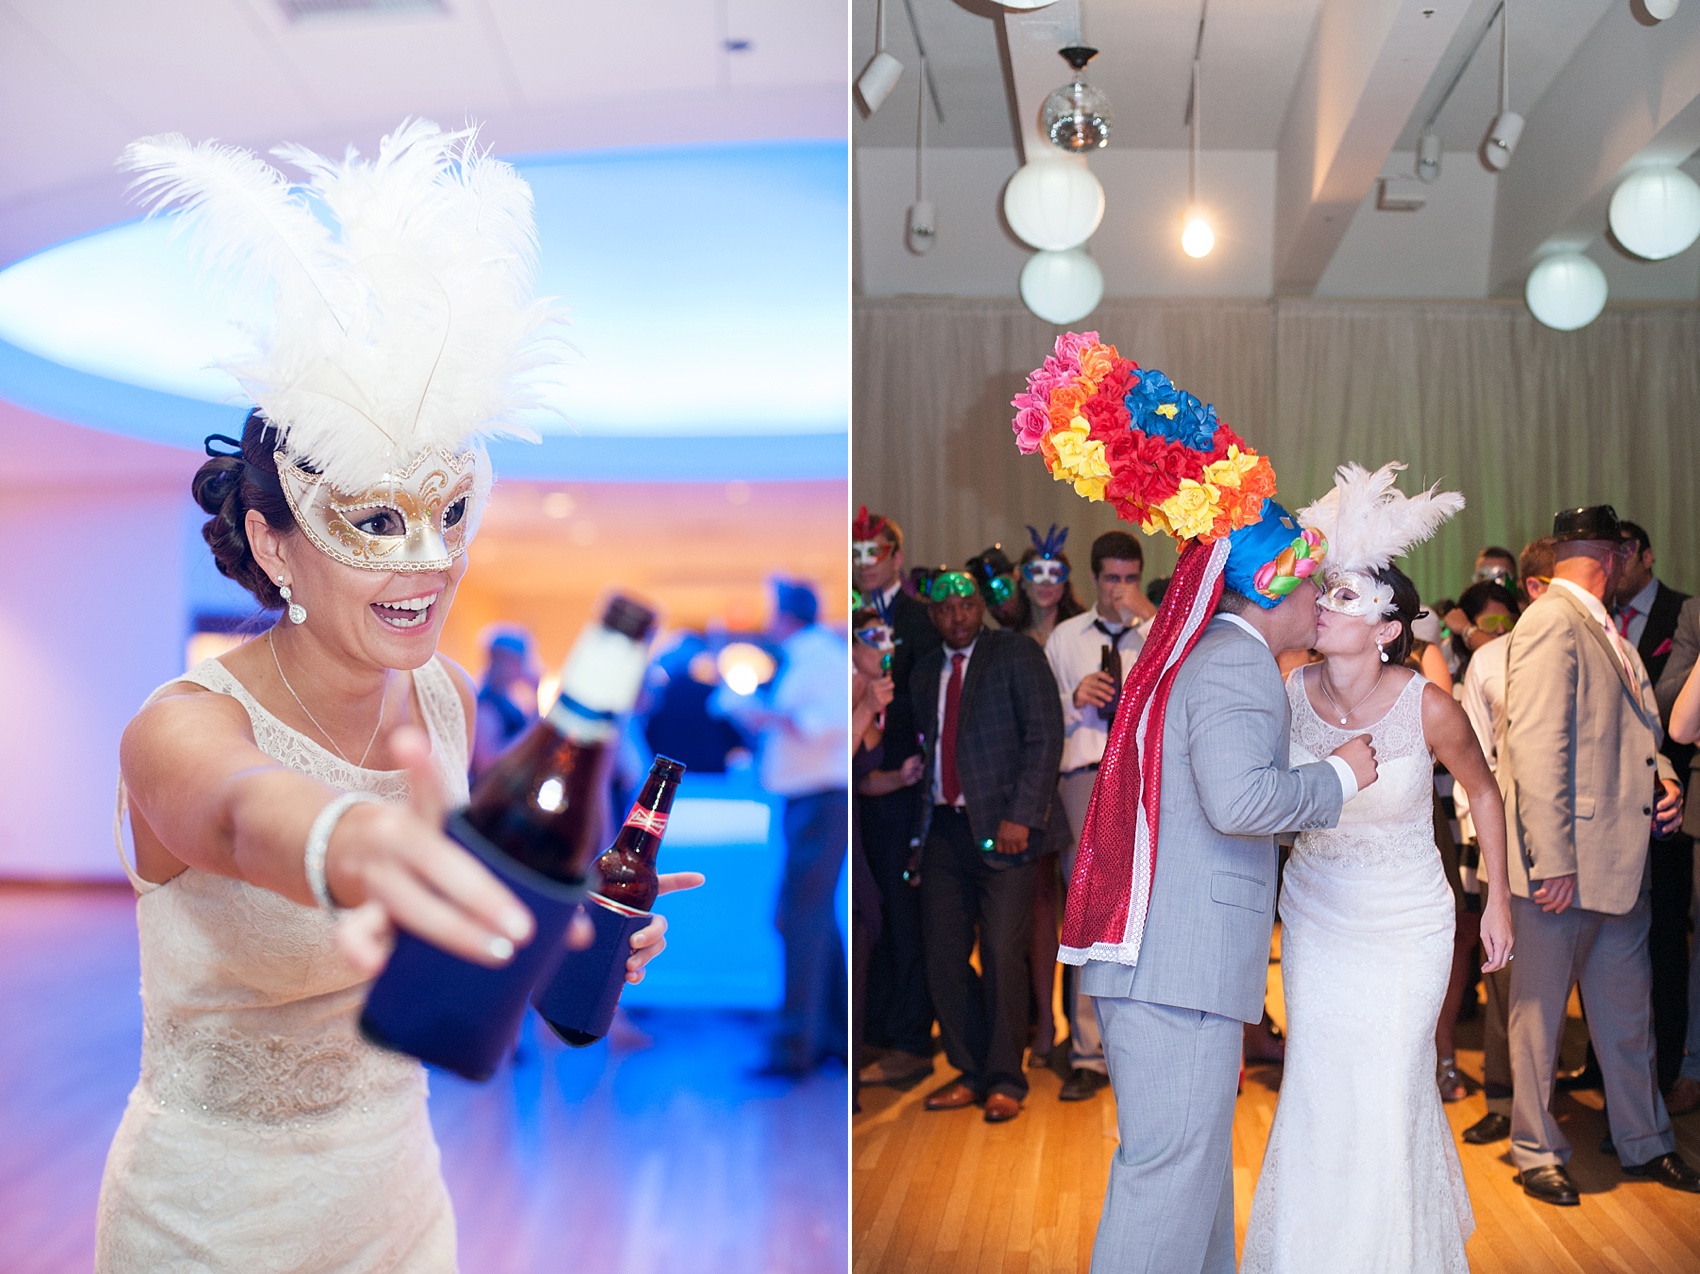 Columbian mask tradition for a wedding at The Center, downtown Cincinnati, Ohio. Photos by Mikkel Paige Photography.